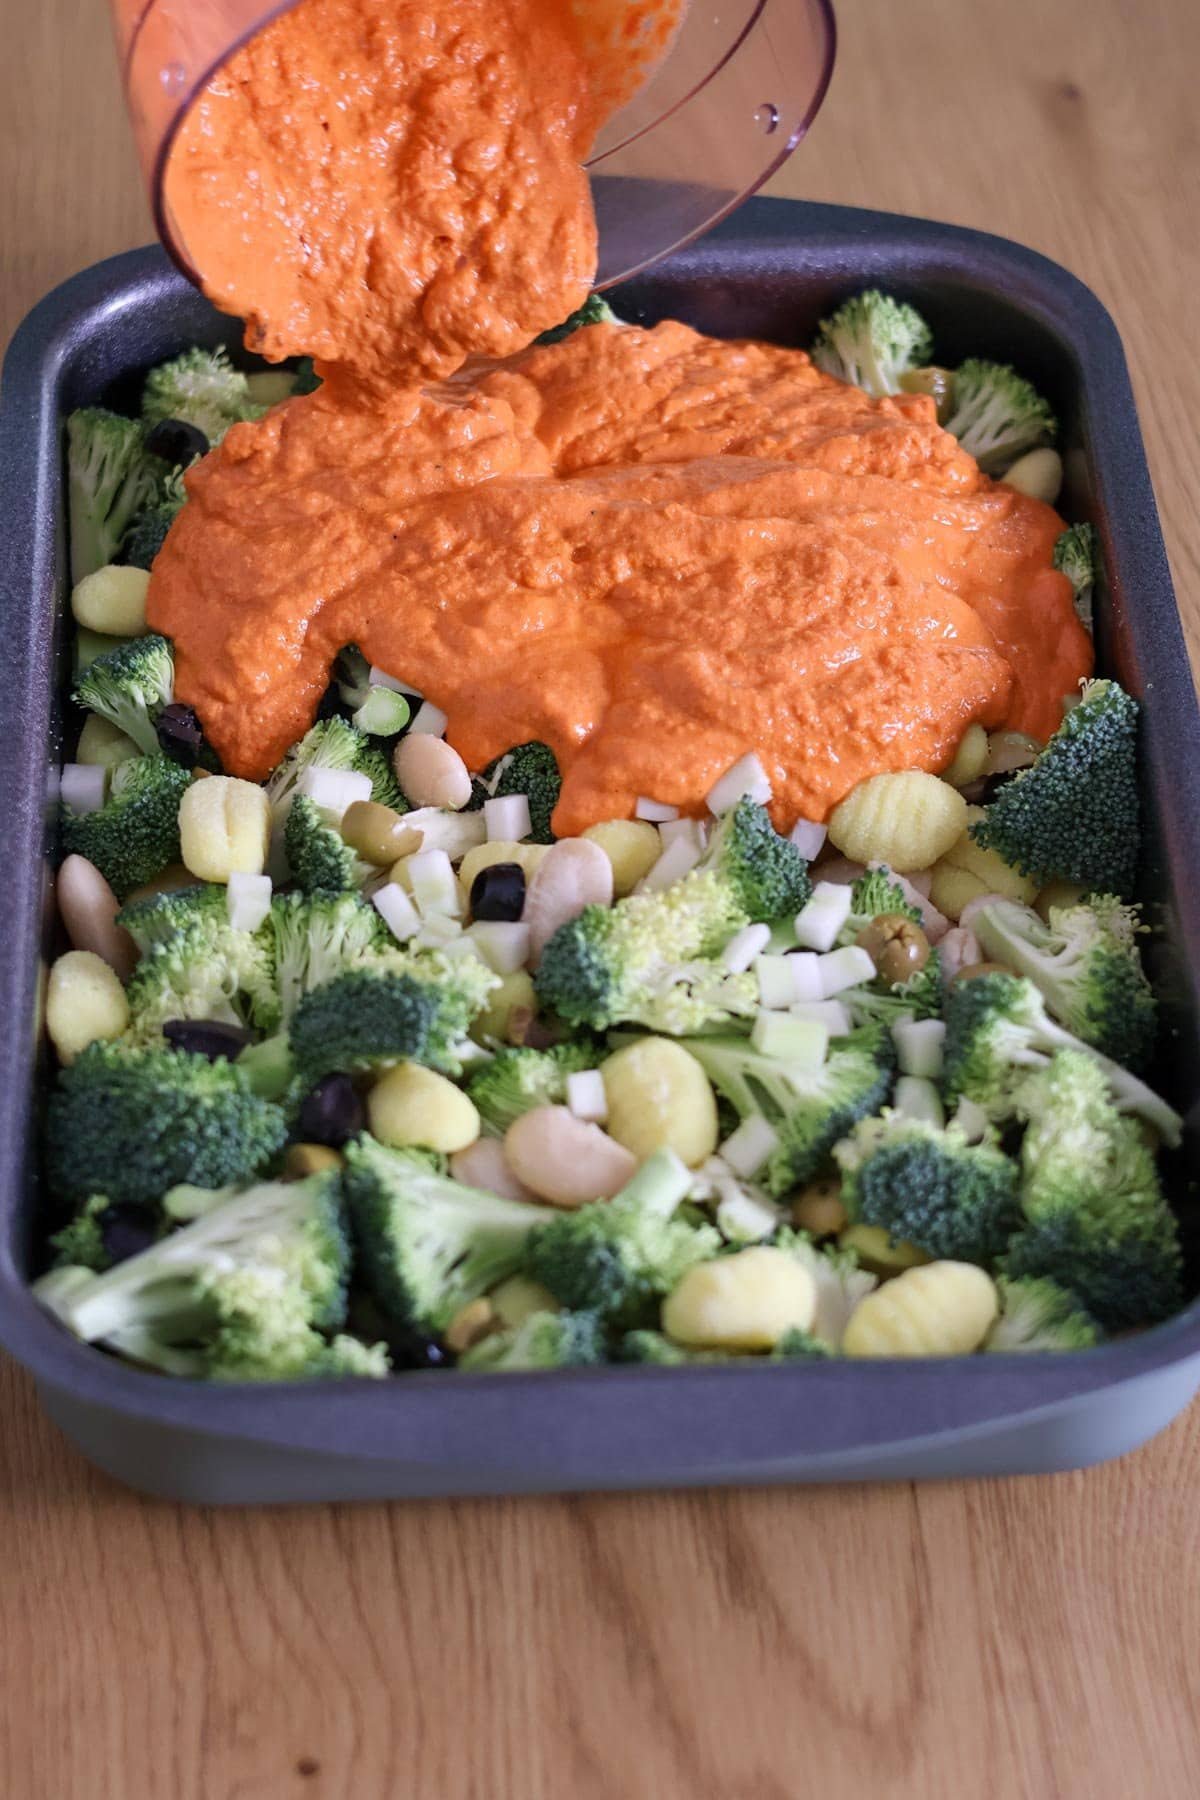 An orange sauce is poured over a baking dish of uncooked gnocchi, broccoli, butter beans and olives.